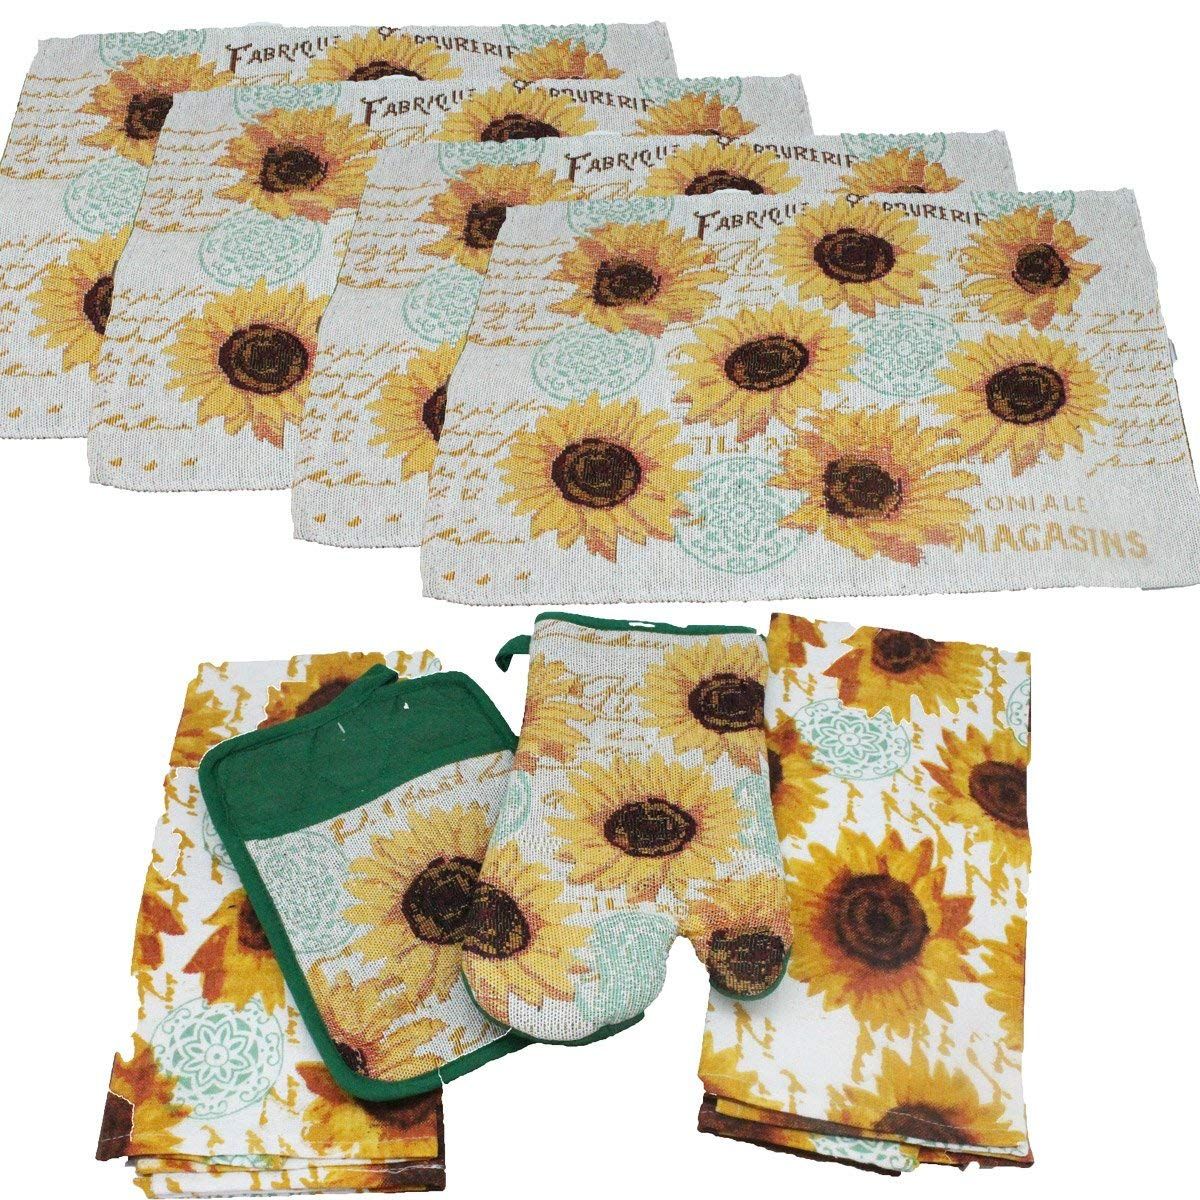 Cheap Kitchen Sunflower, Find Kitchen Sunflower Deals On Intended For Window Curtains Sets With Colorful Marketplace Vegetable And Sunflower Print (View 18 of 20)